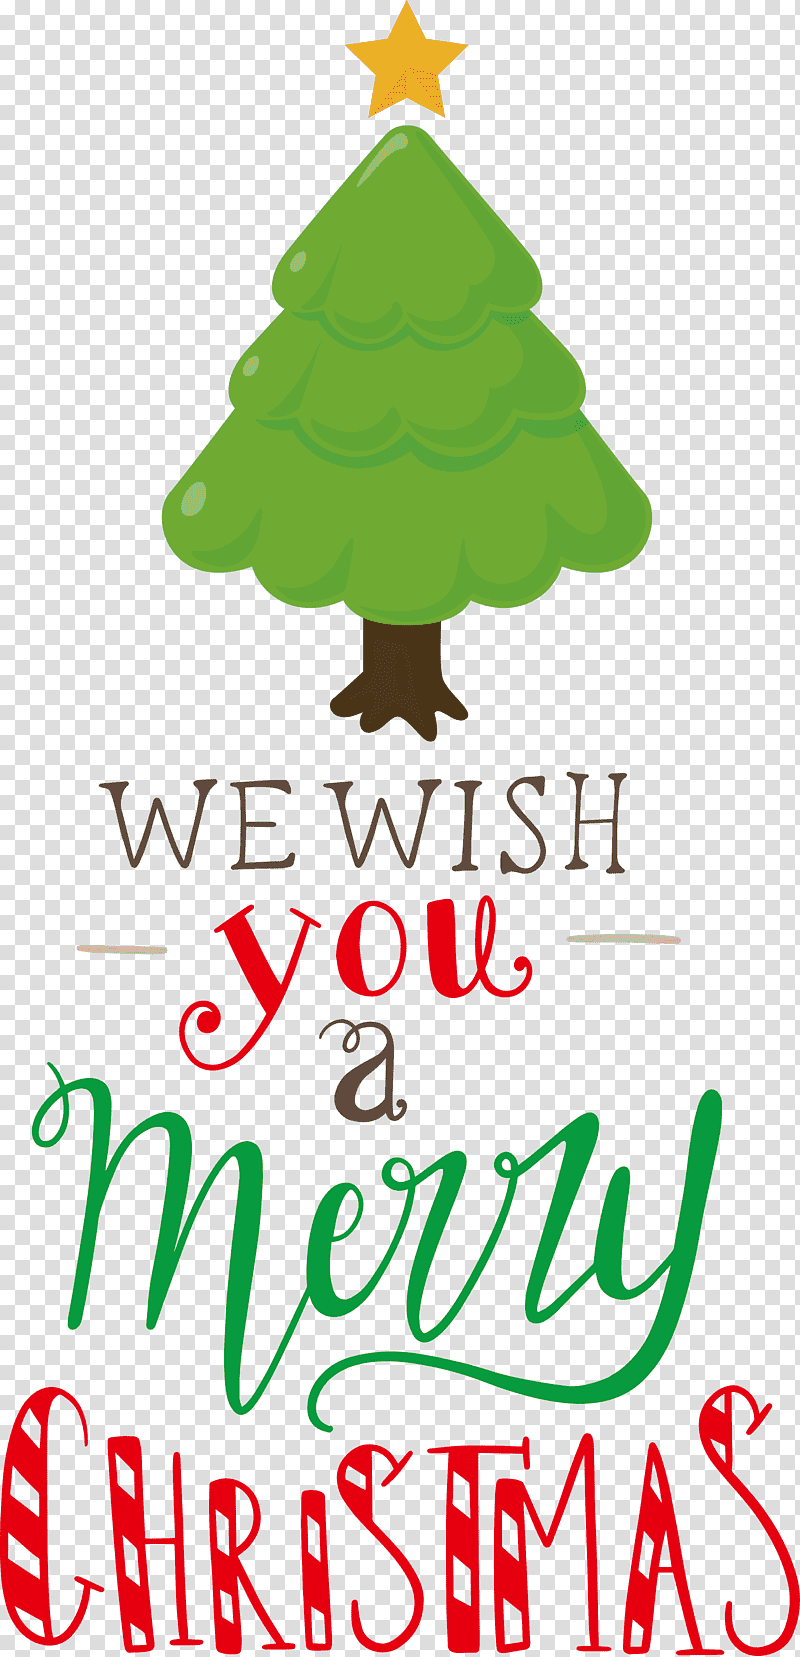 Merry Christmas We Wish You A Merry Christmas, Christmas Tree, Christmas Day, Holiday Ornament, Christmas Ornament, Christmas Ornament M, Line transparent background PNG clipart